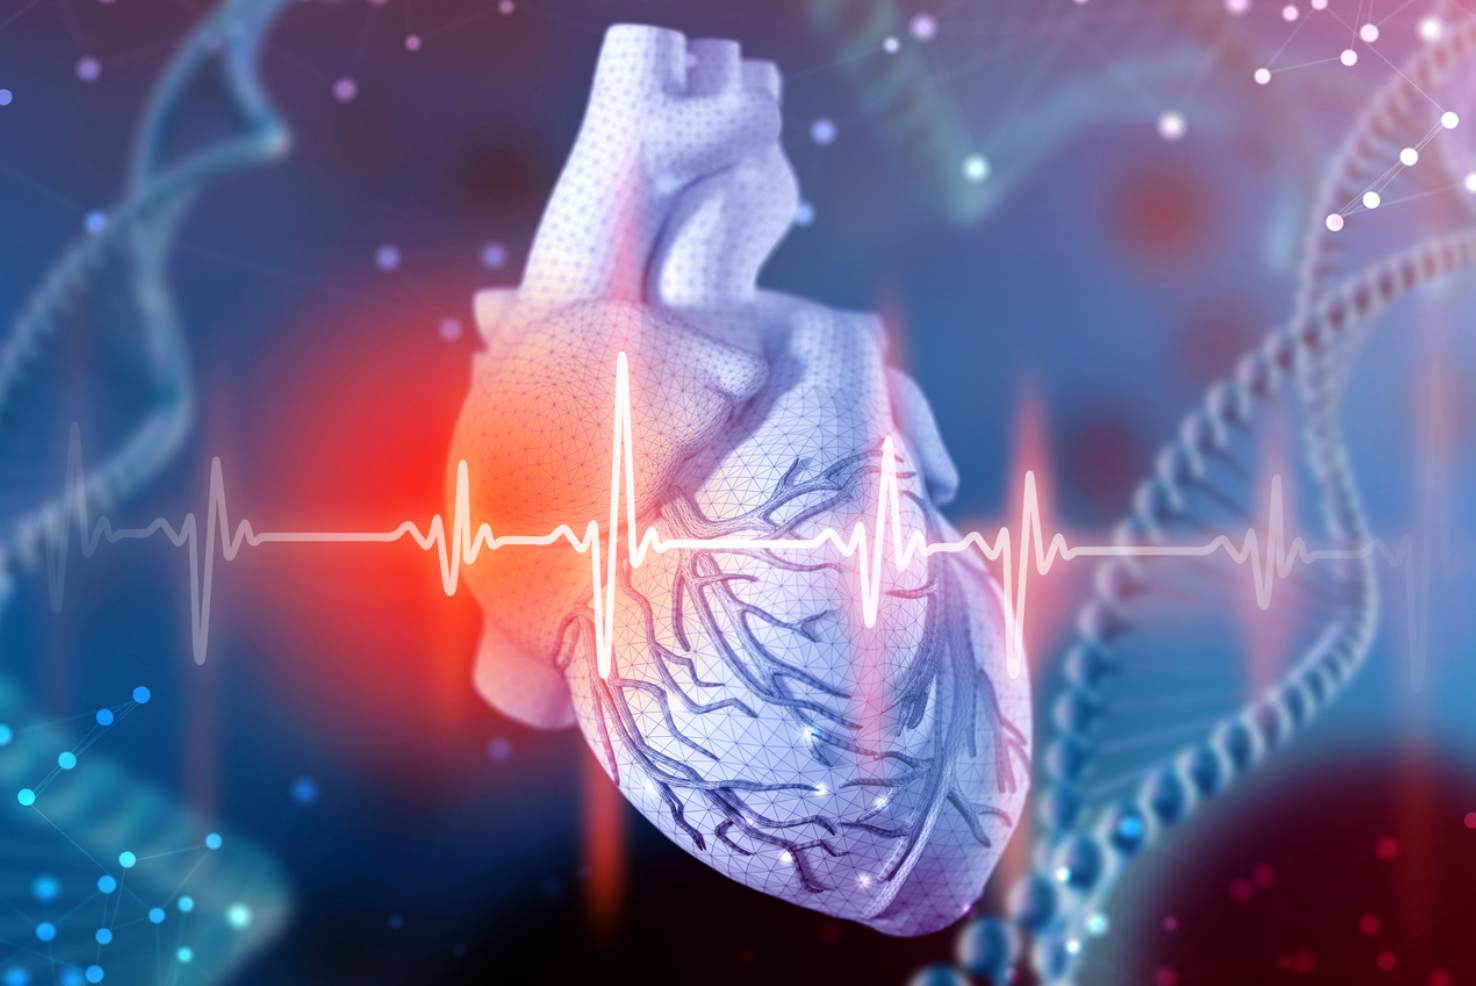 Study: Mild, Moderate COVID-19 Can Affect Cardiovascular System in Young Adults